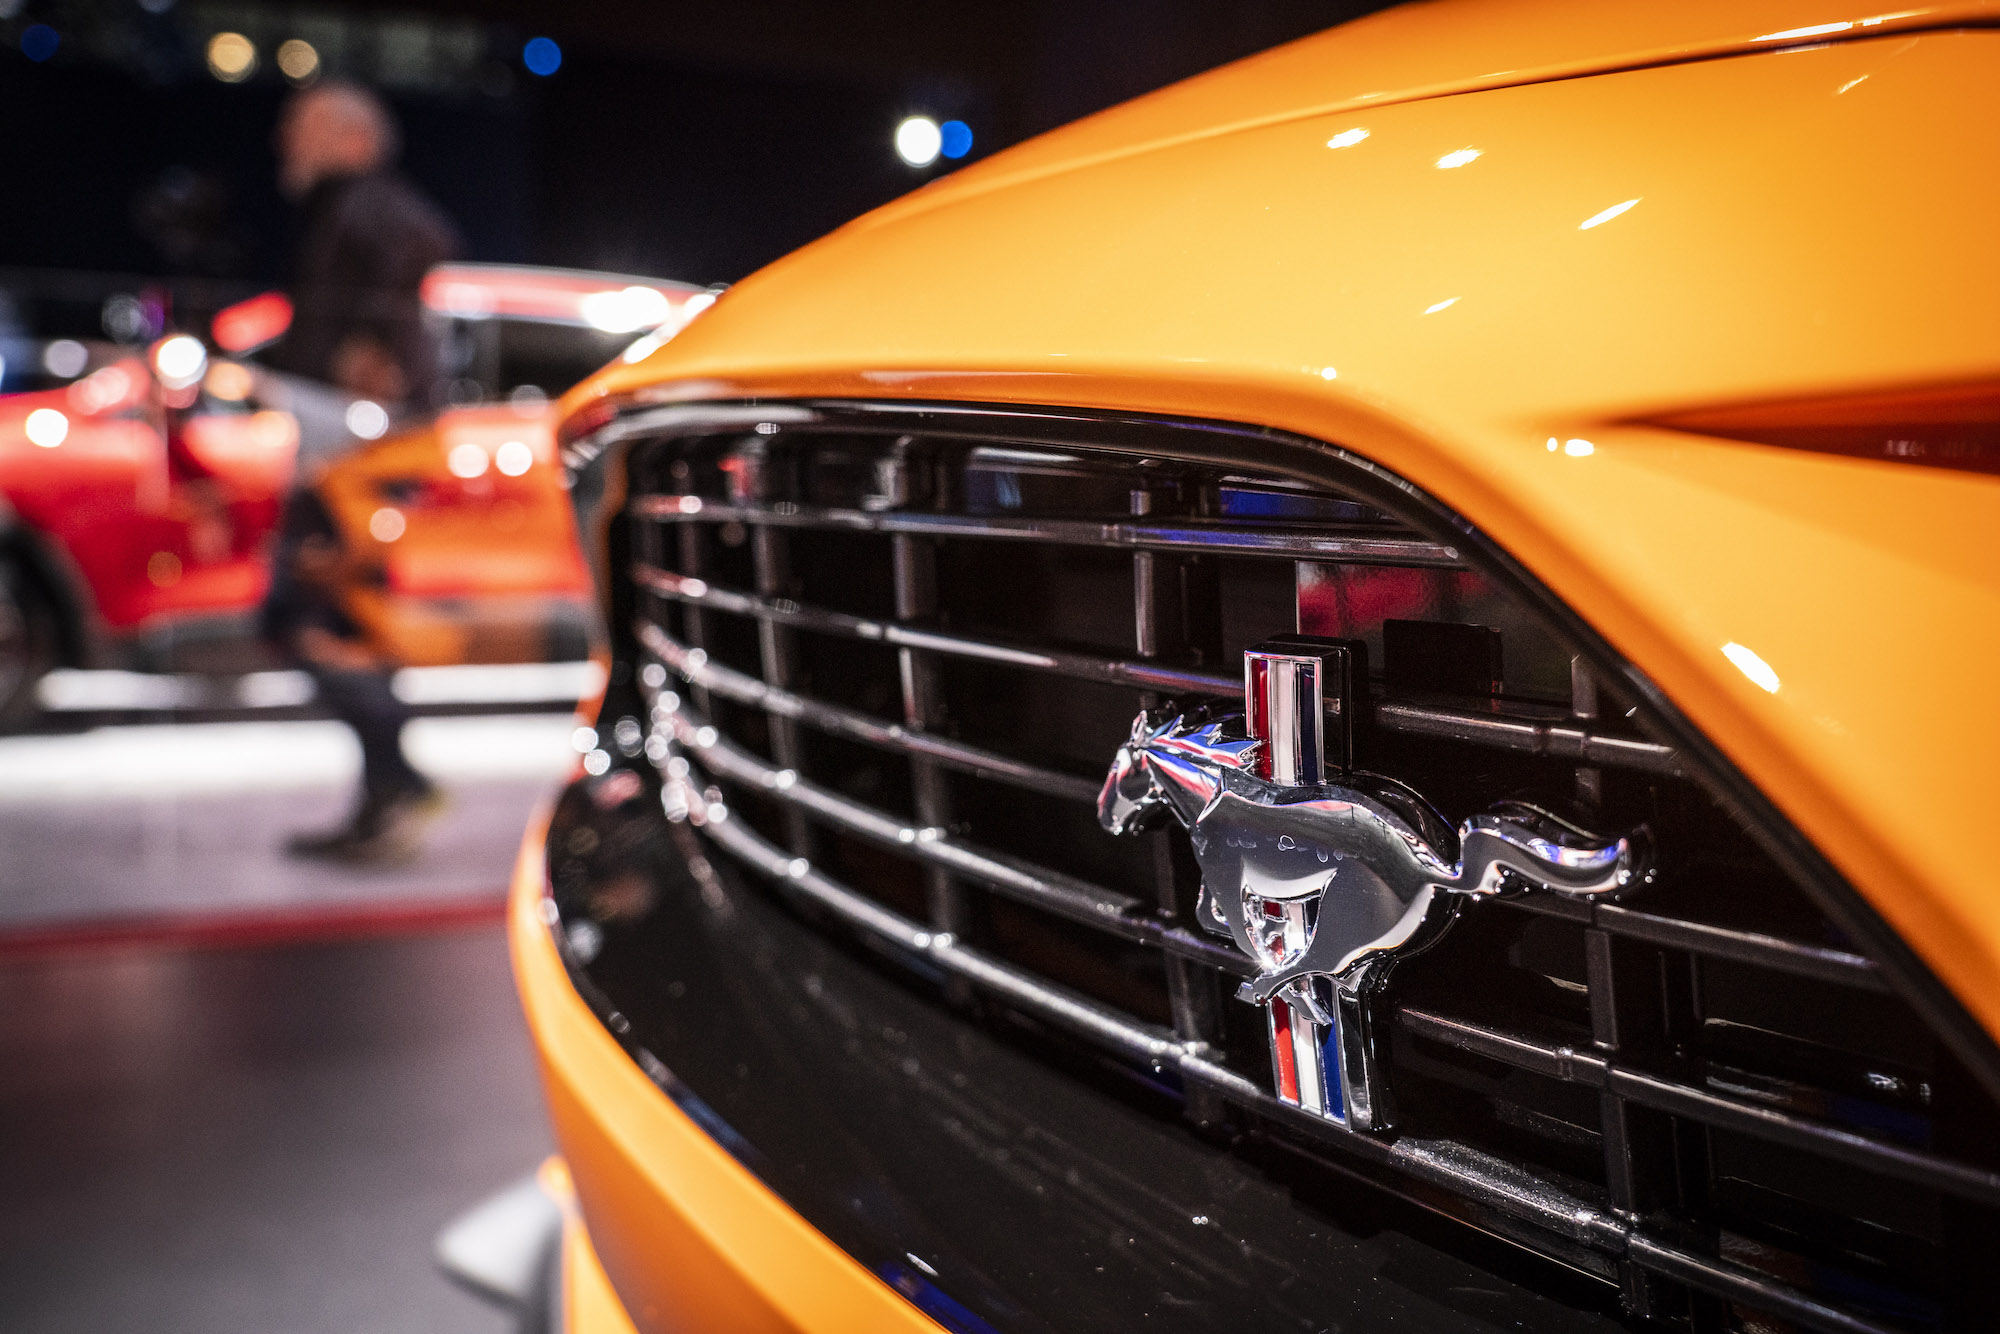 A logo is displayed on the grille of an orange Ford Mustang at the 2019 New York International Auto Show